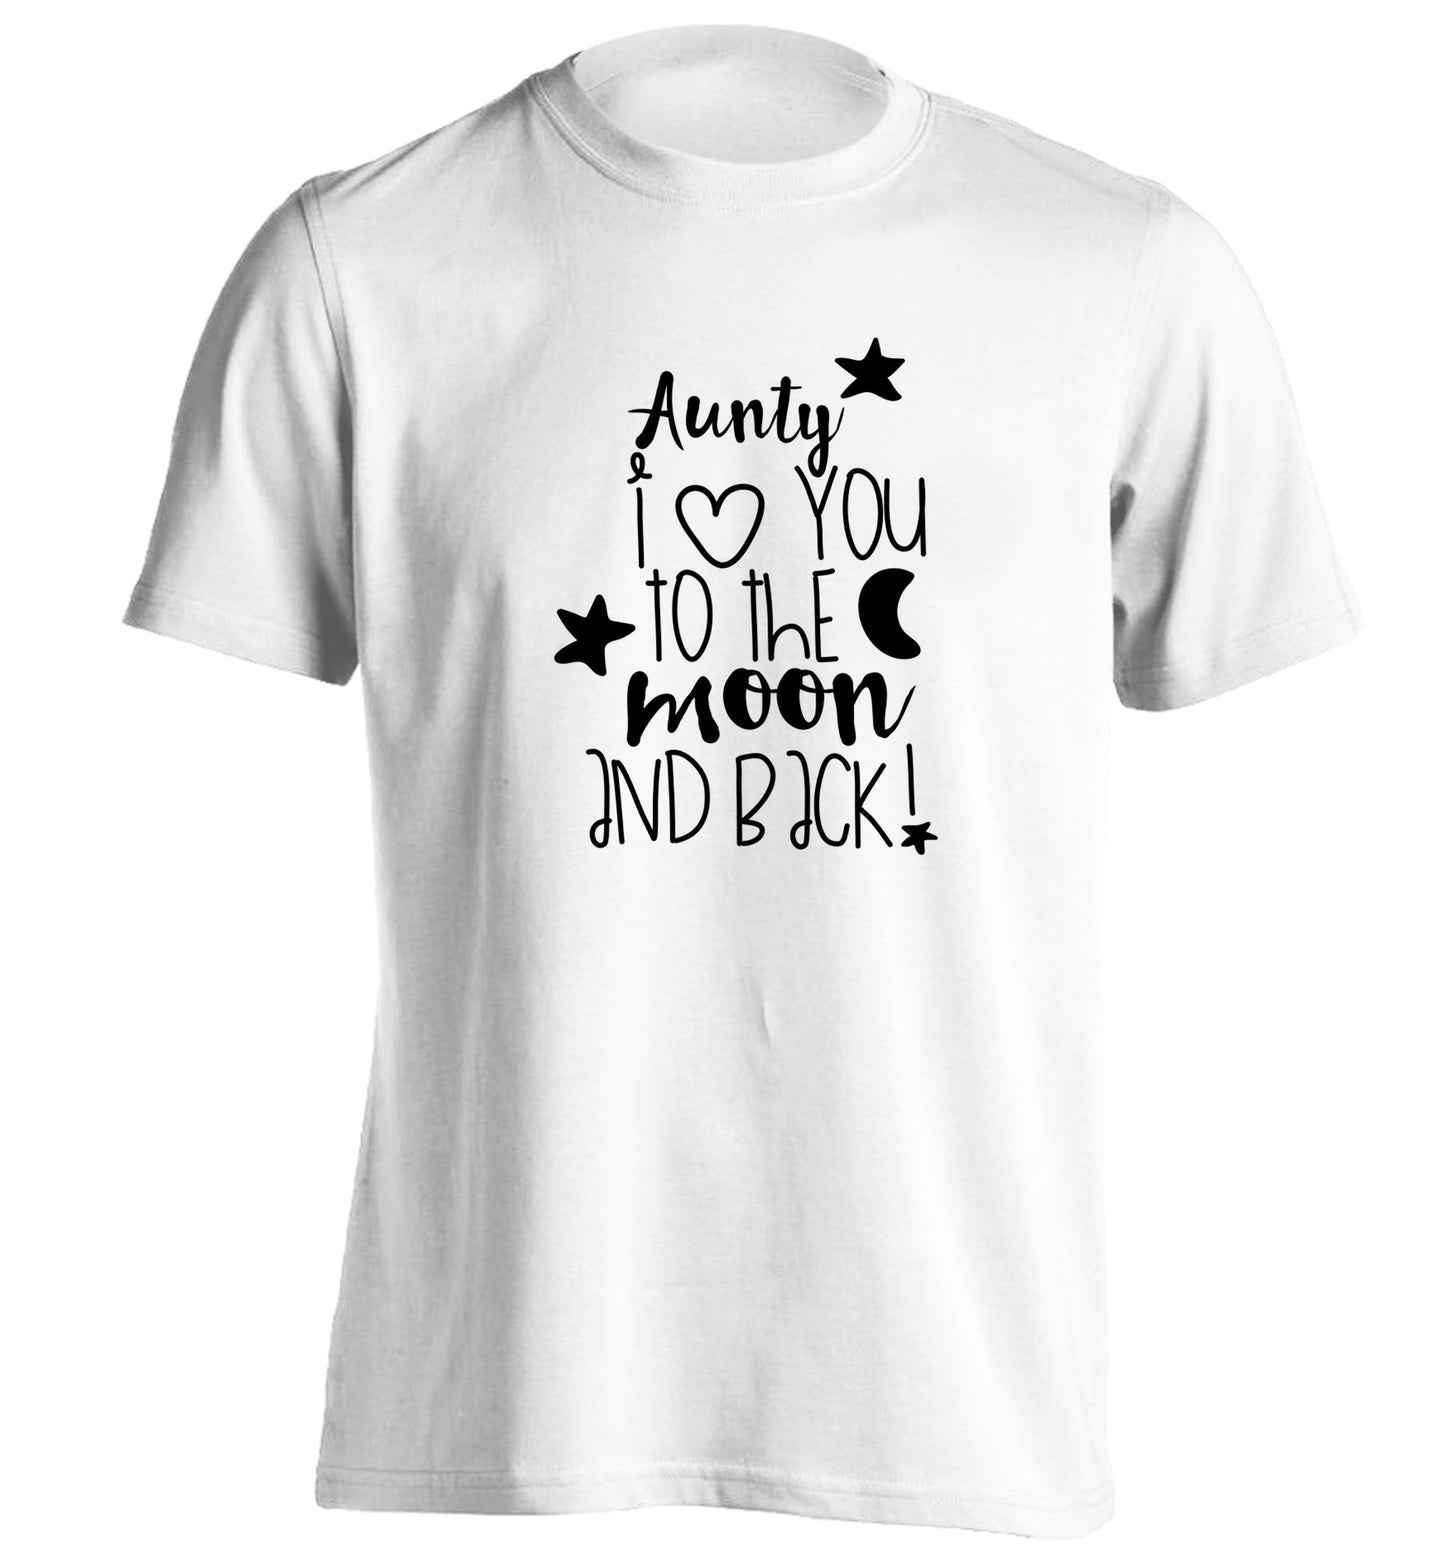 Aunty I love you to the moon and back adults unisex white Tshirt 2XL